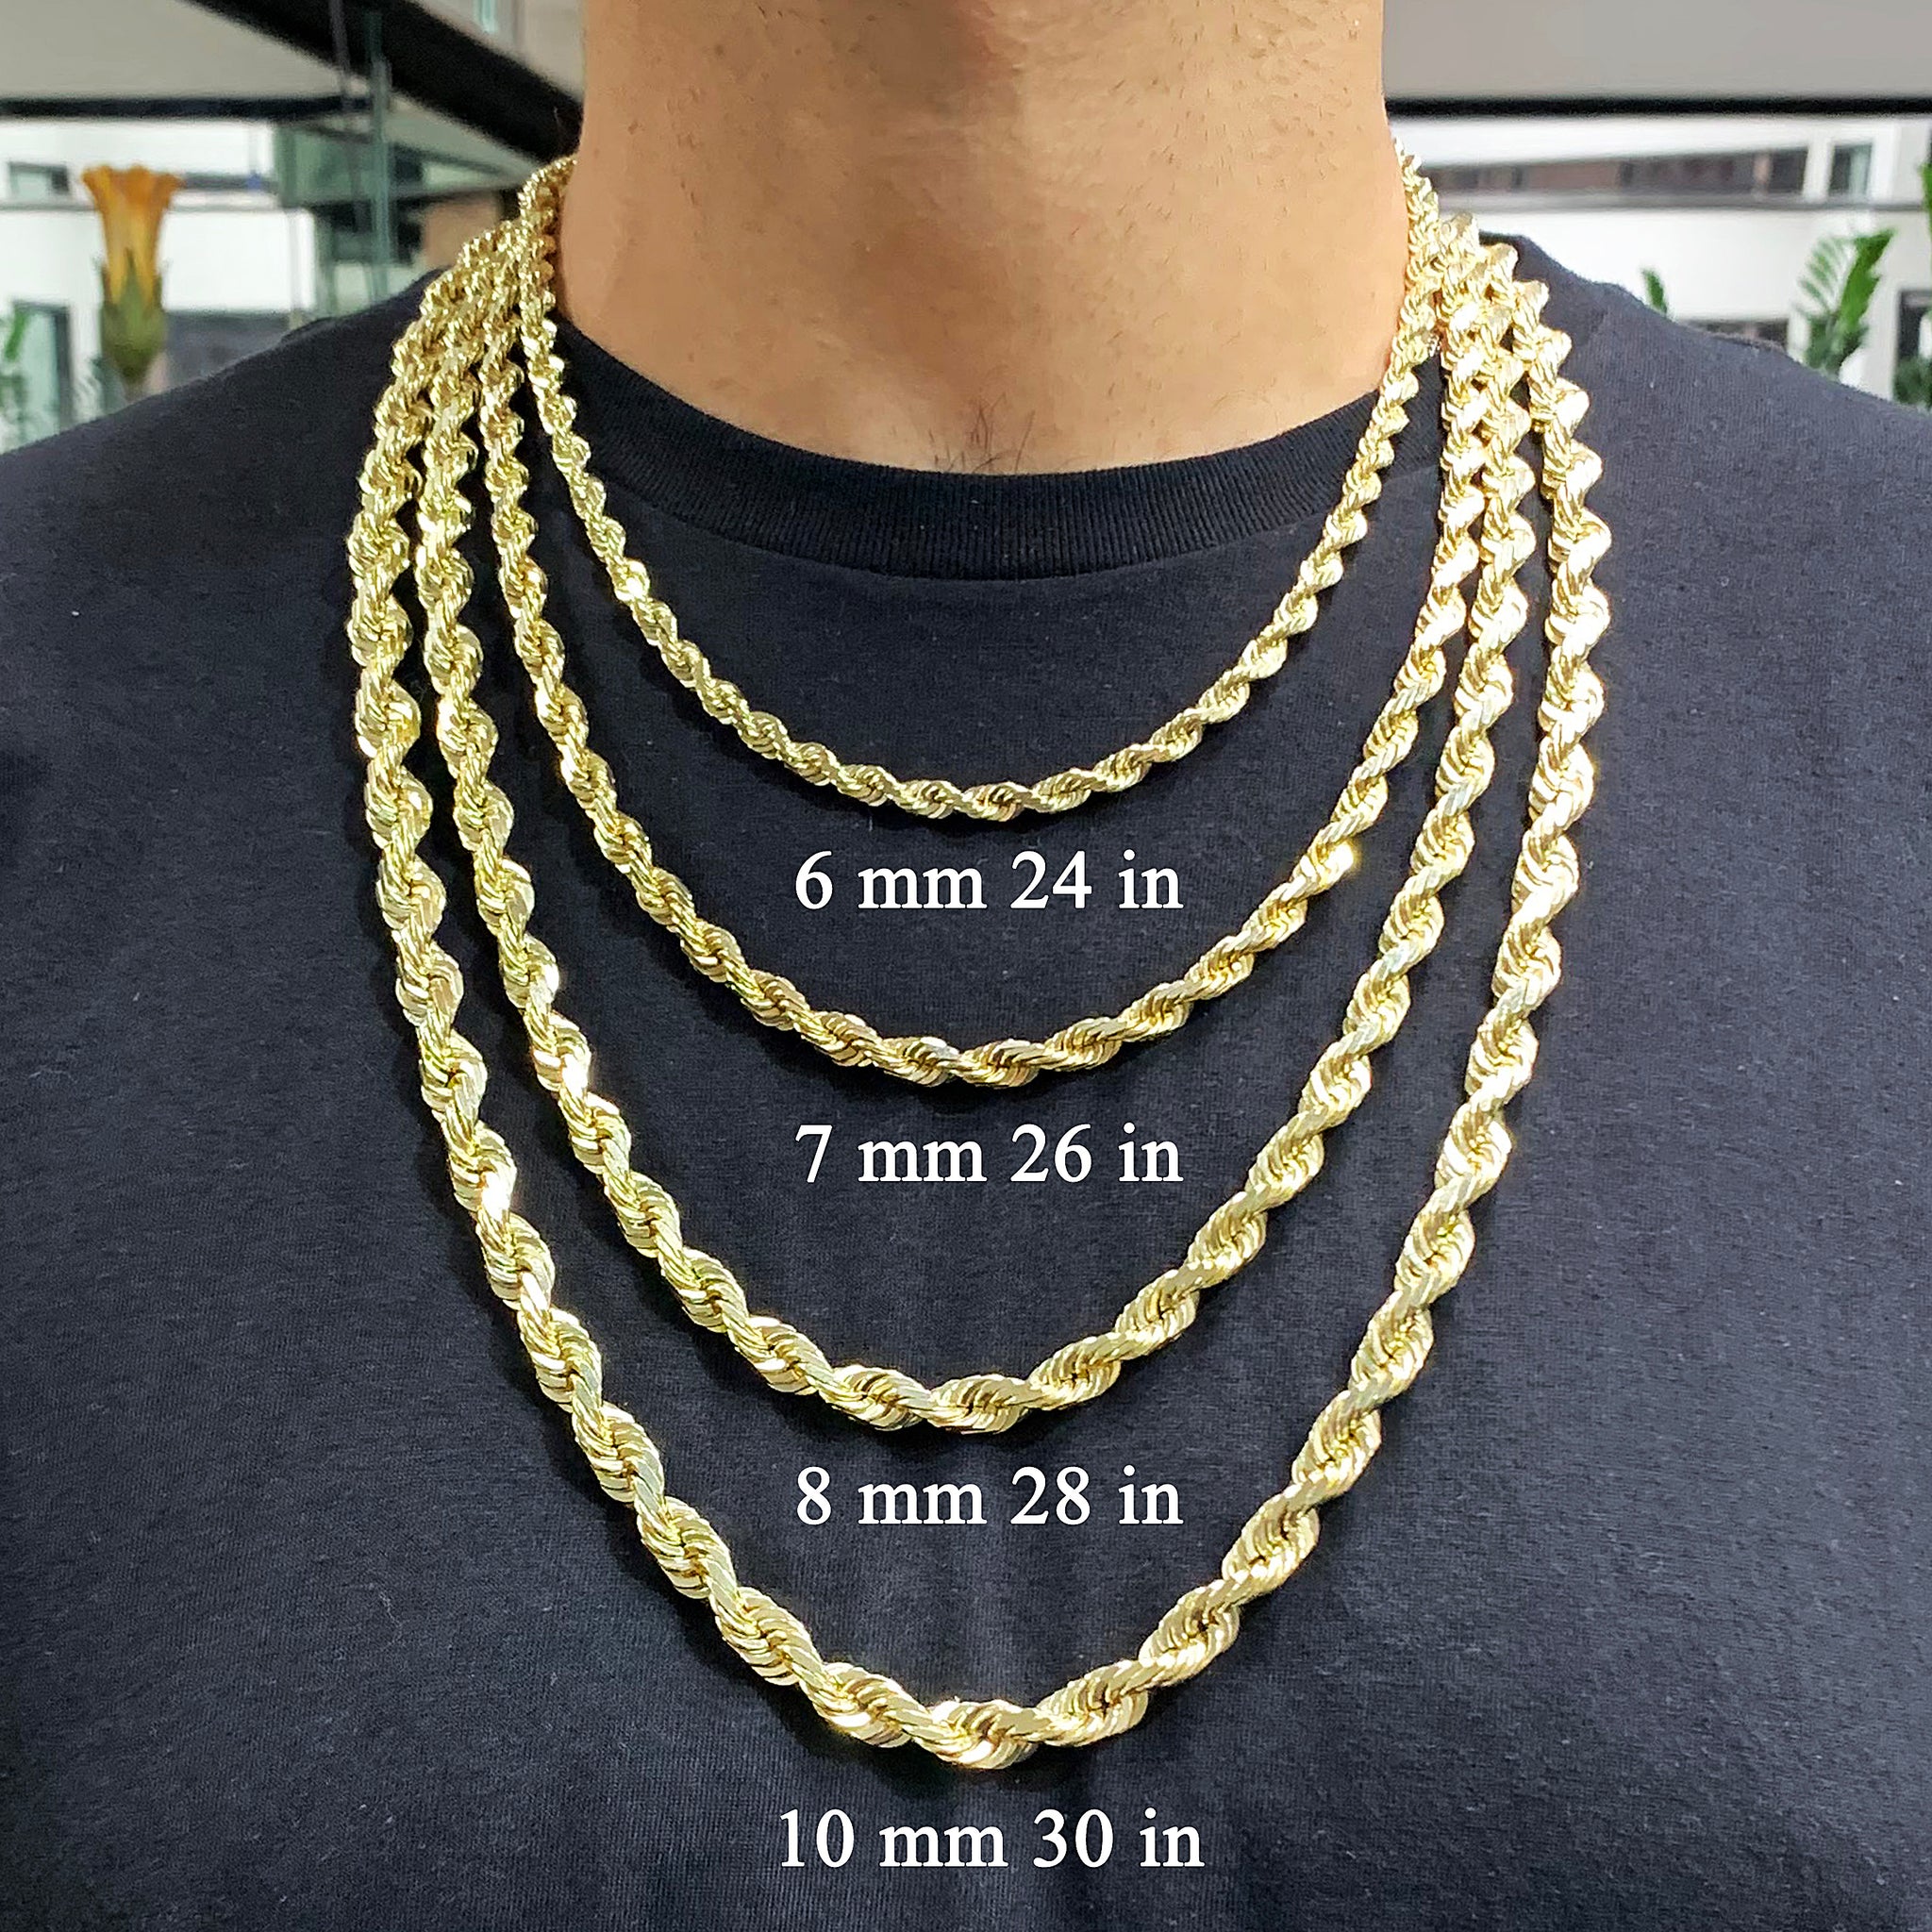 4.0mm Diamond-Cut Rope Chain Necklace in 14K Gold - 22